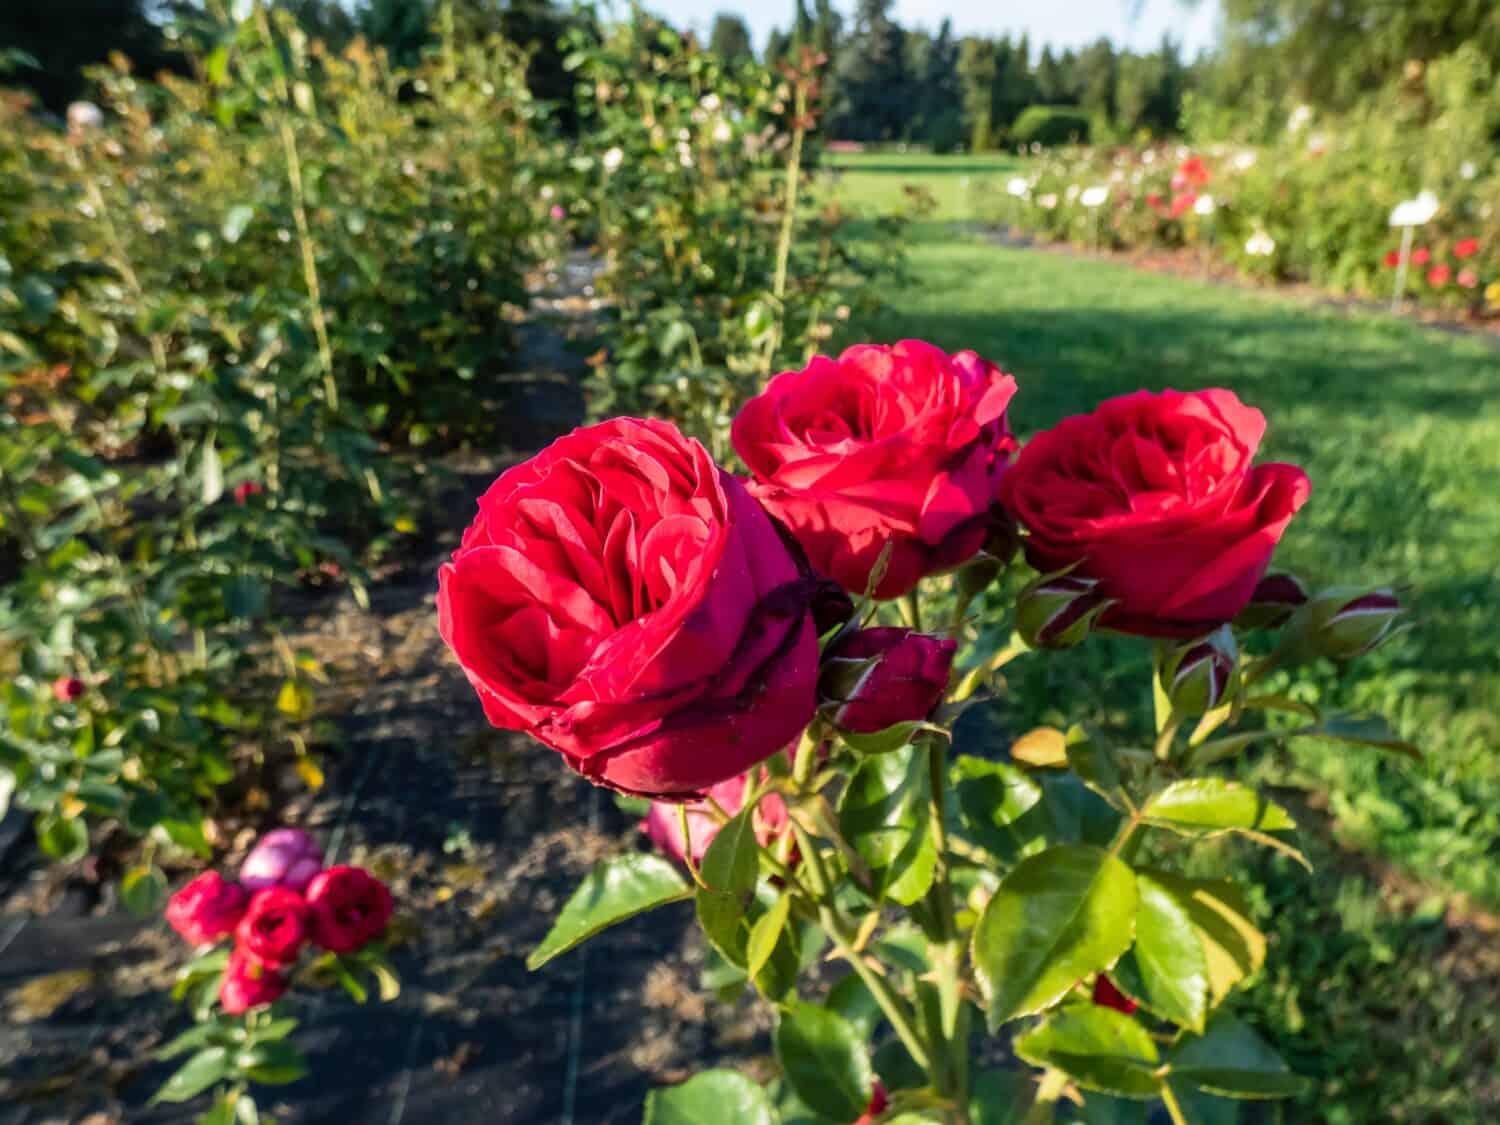 Climbing rose 'Red eden rose' flowering with large, full, cluster-flowered, cupped, old-fashioned blooms in bright sunlight in a park